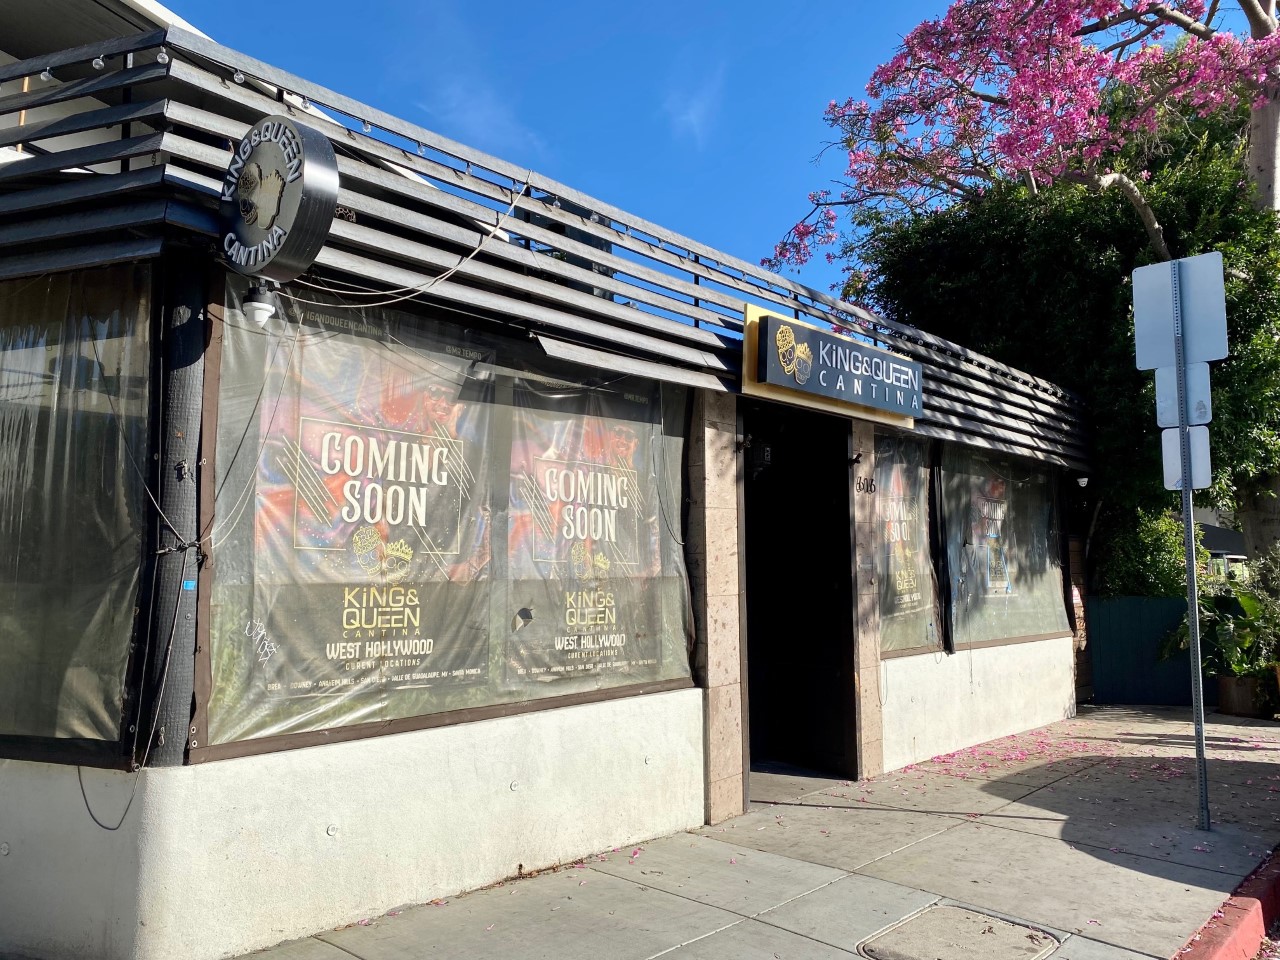 King and Queen Cantina Finally Opens in West Hollywood After Two Years -  WEHO TIMES West Hollywood News, Nightlife and Events